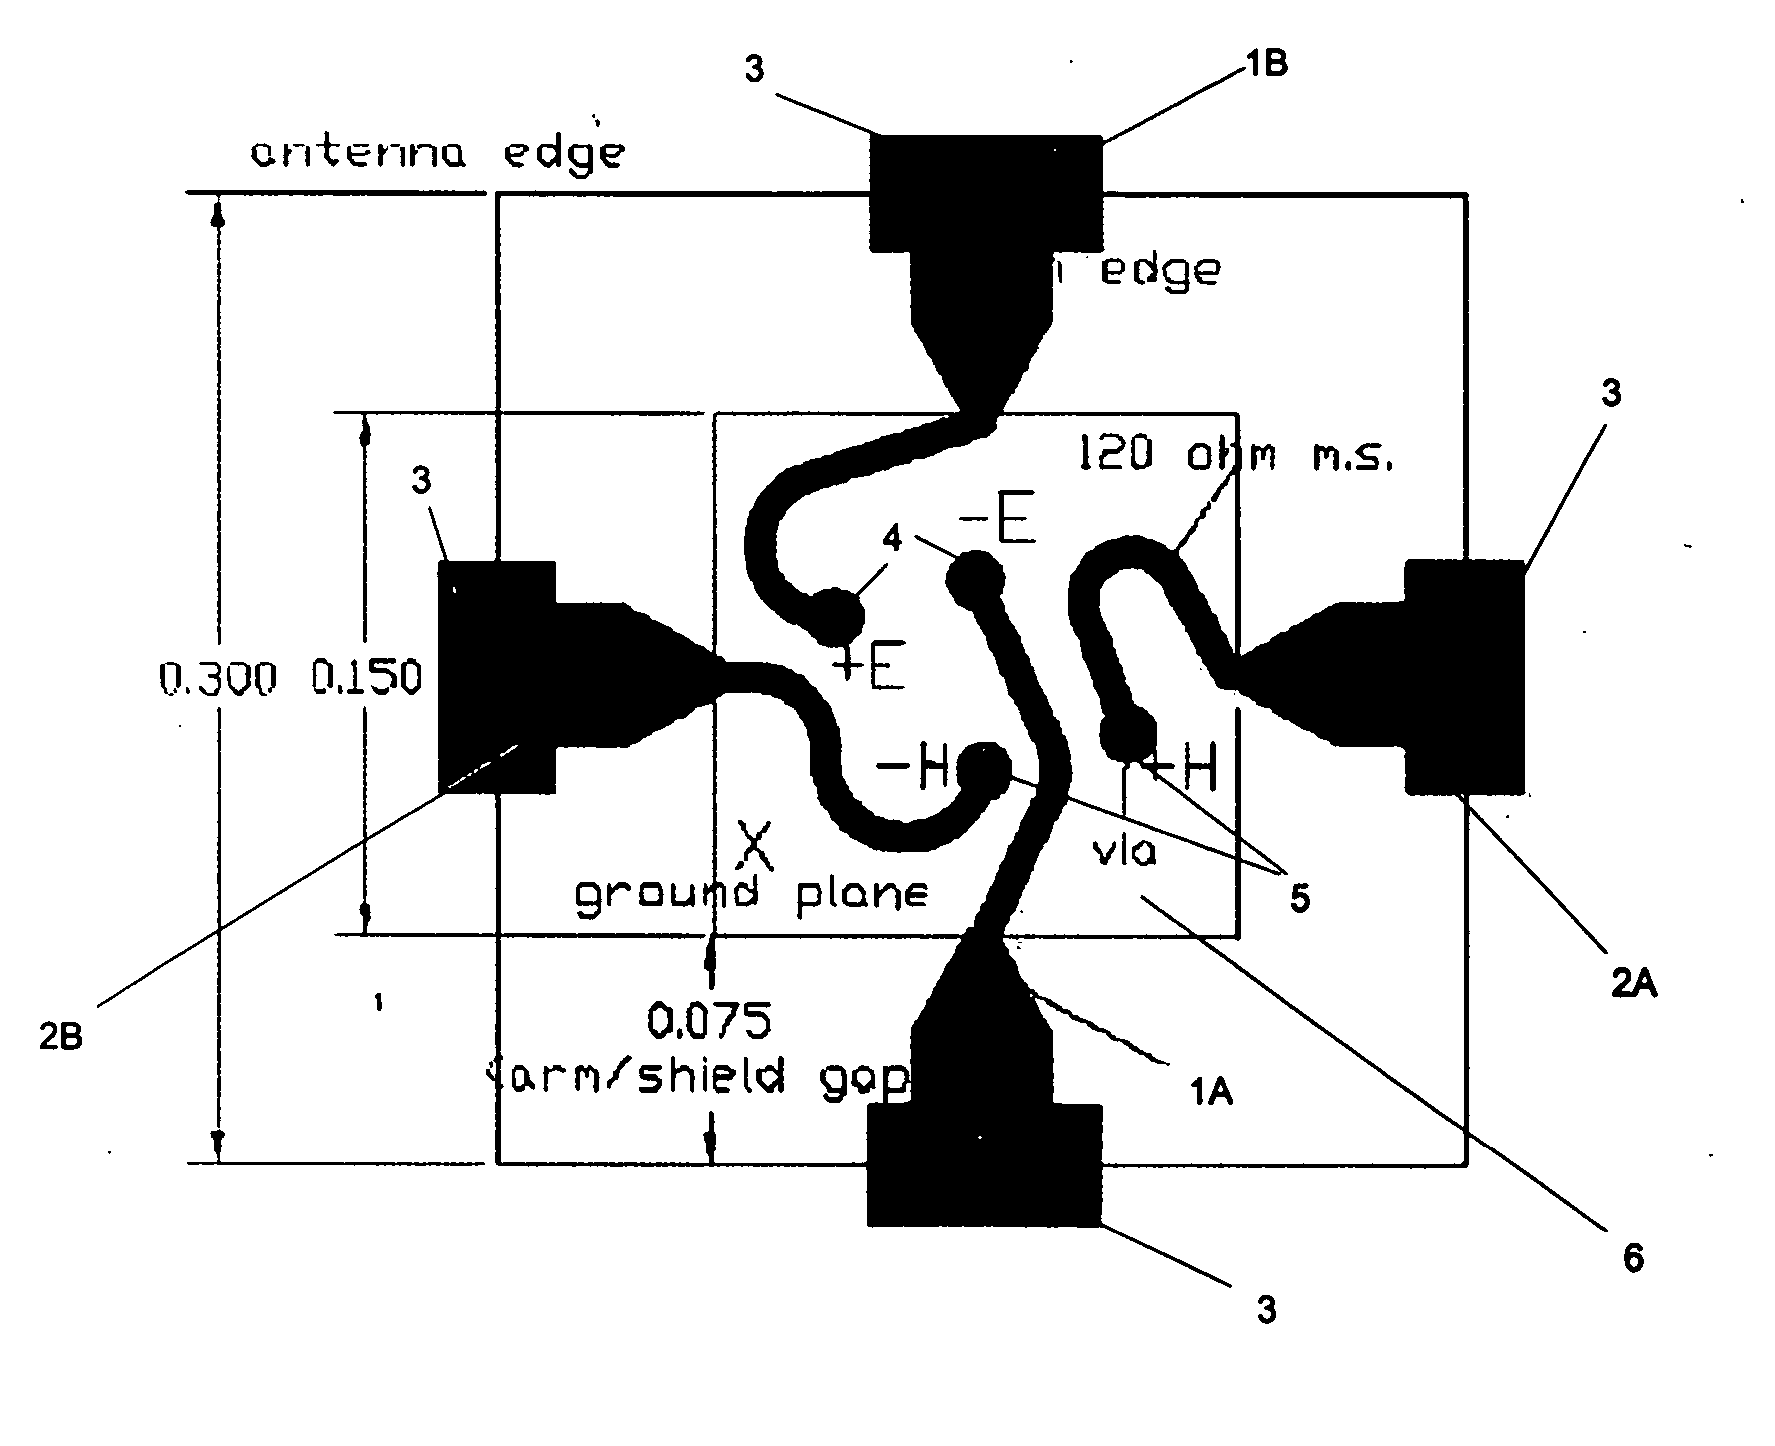 Connections and feeds for broadband antennas